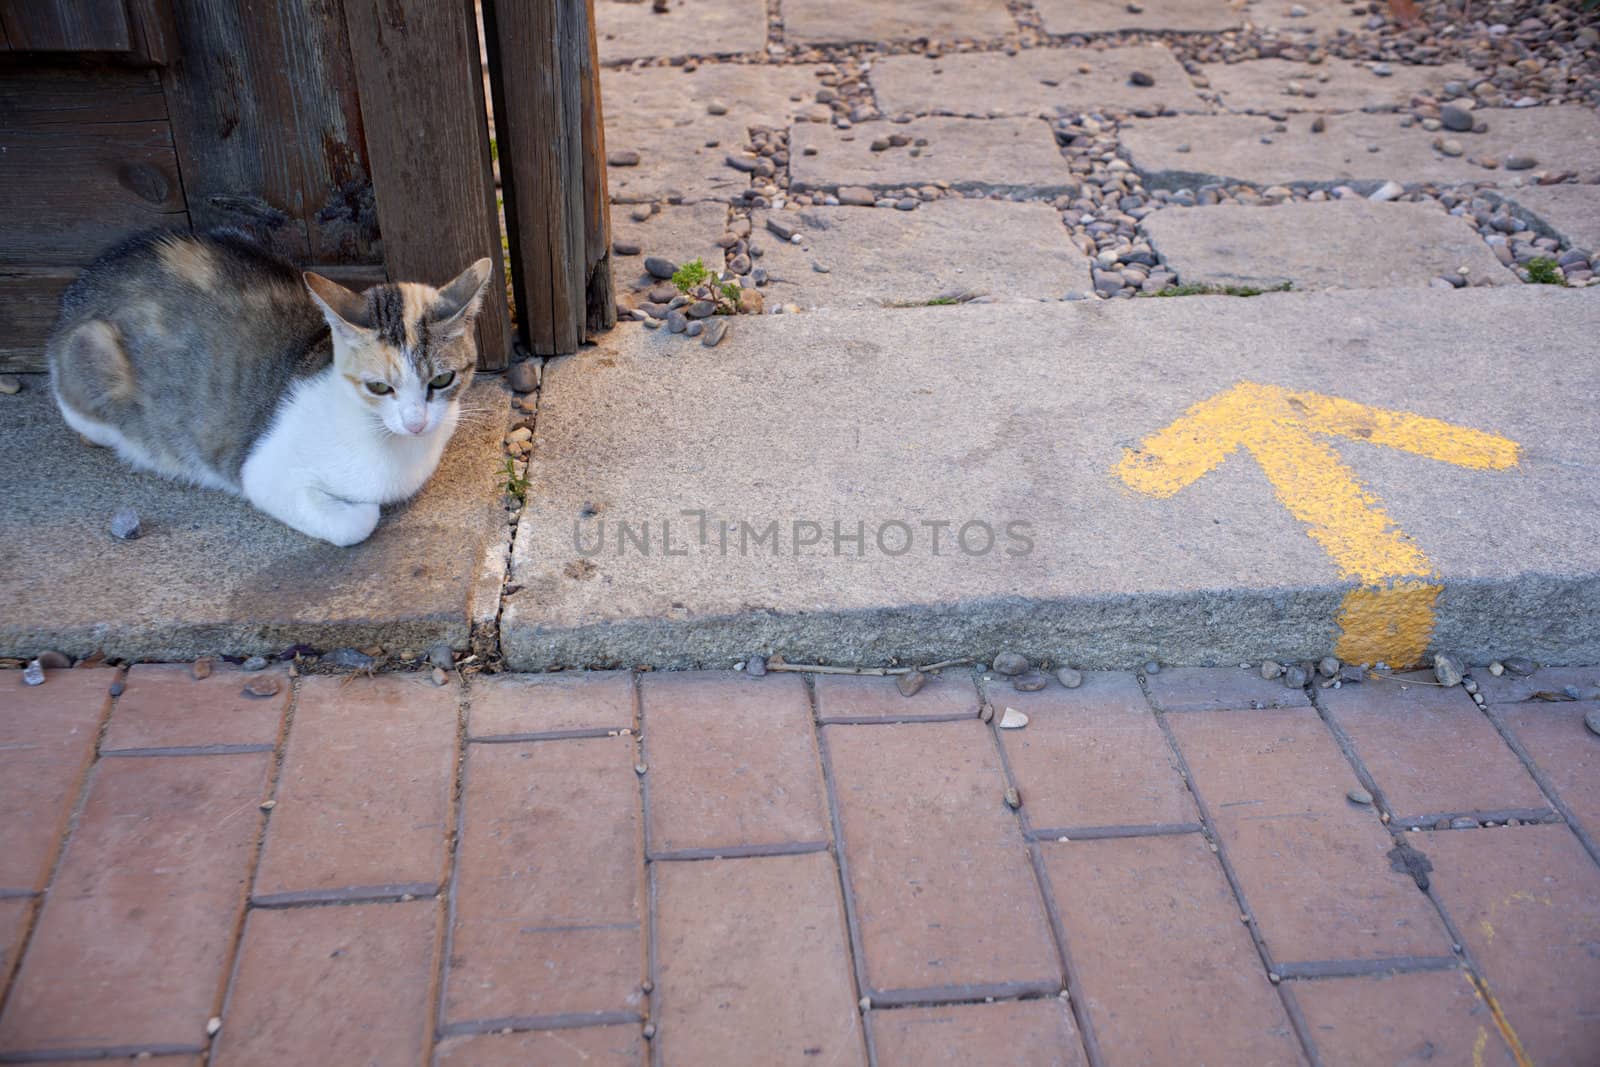 A cat next to the door and yellow arrow painted on the road